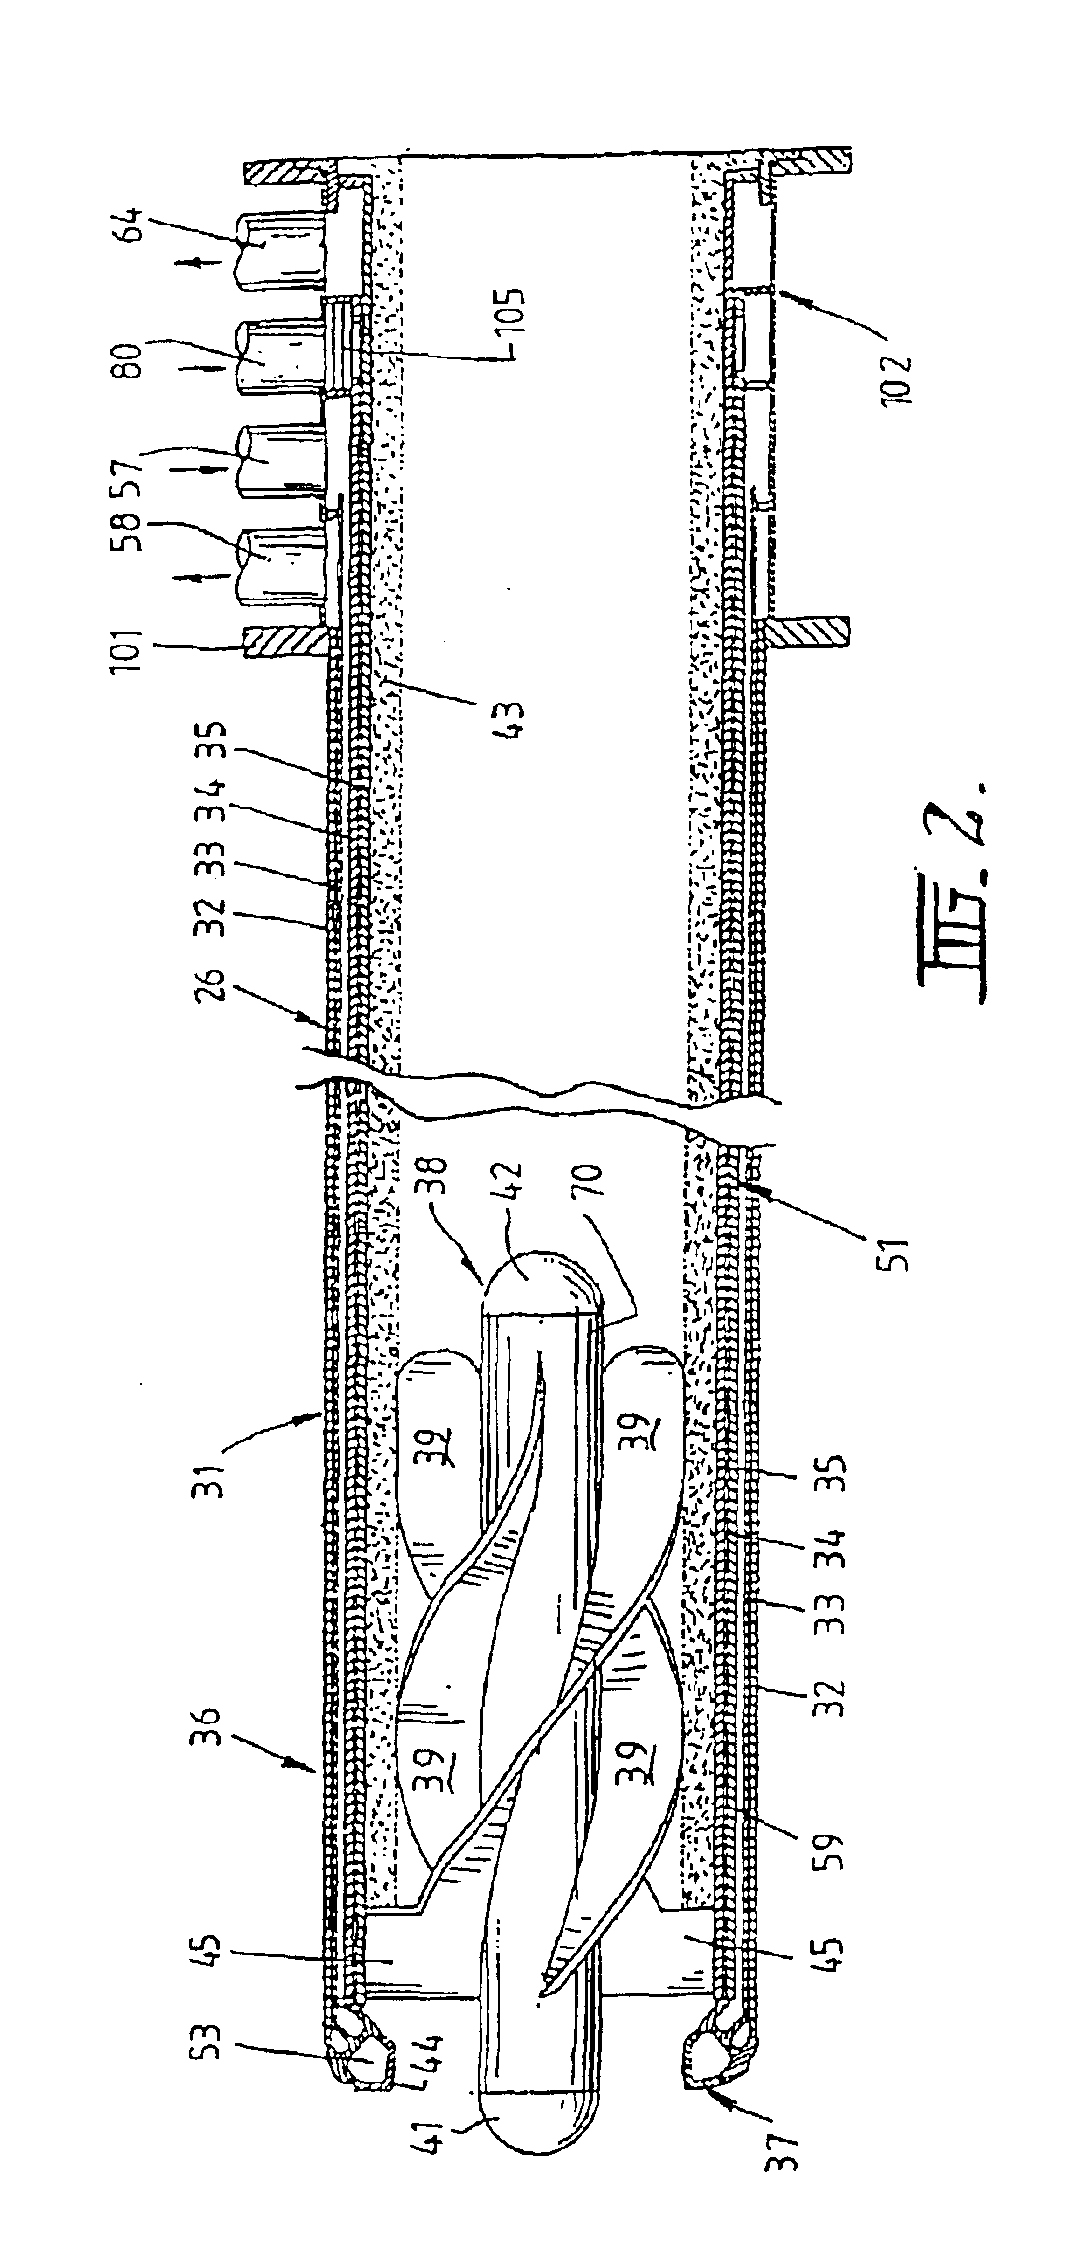 Direct smelting process and apparatus